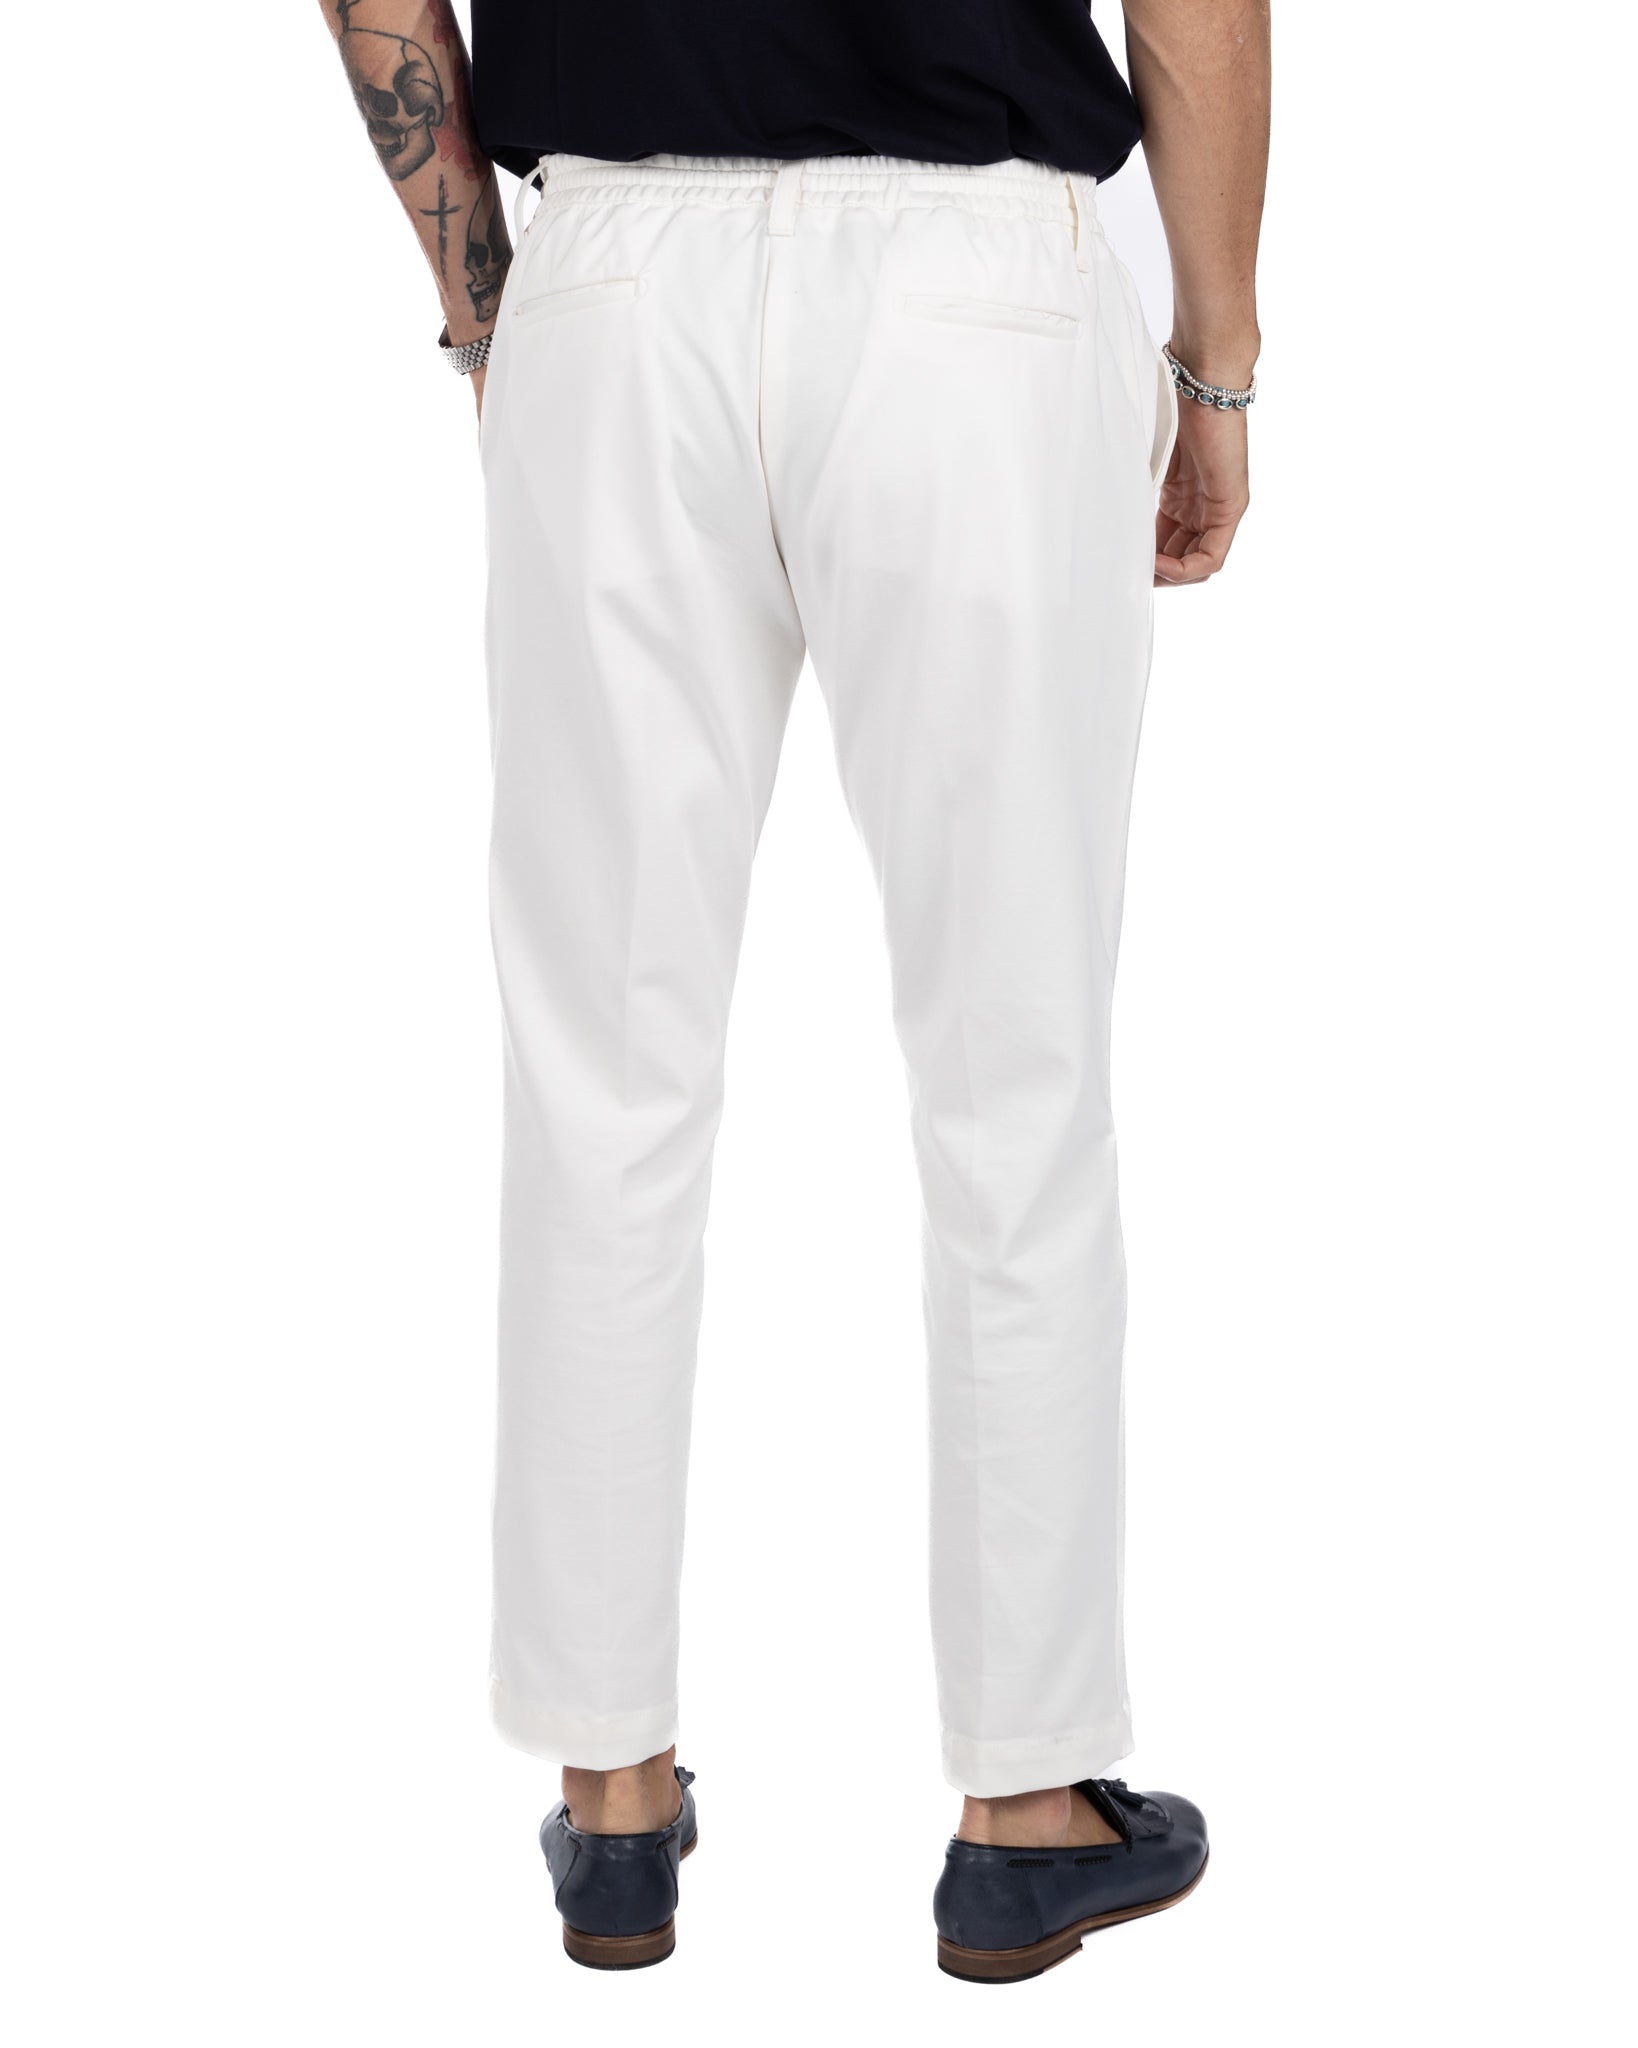 Shelby - cream cotton trousers